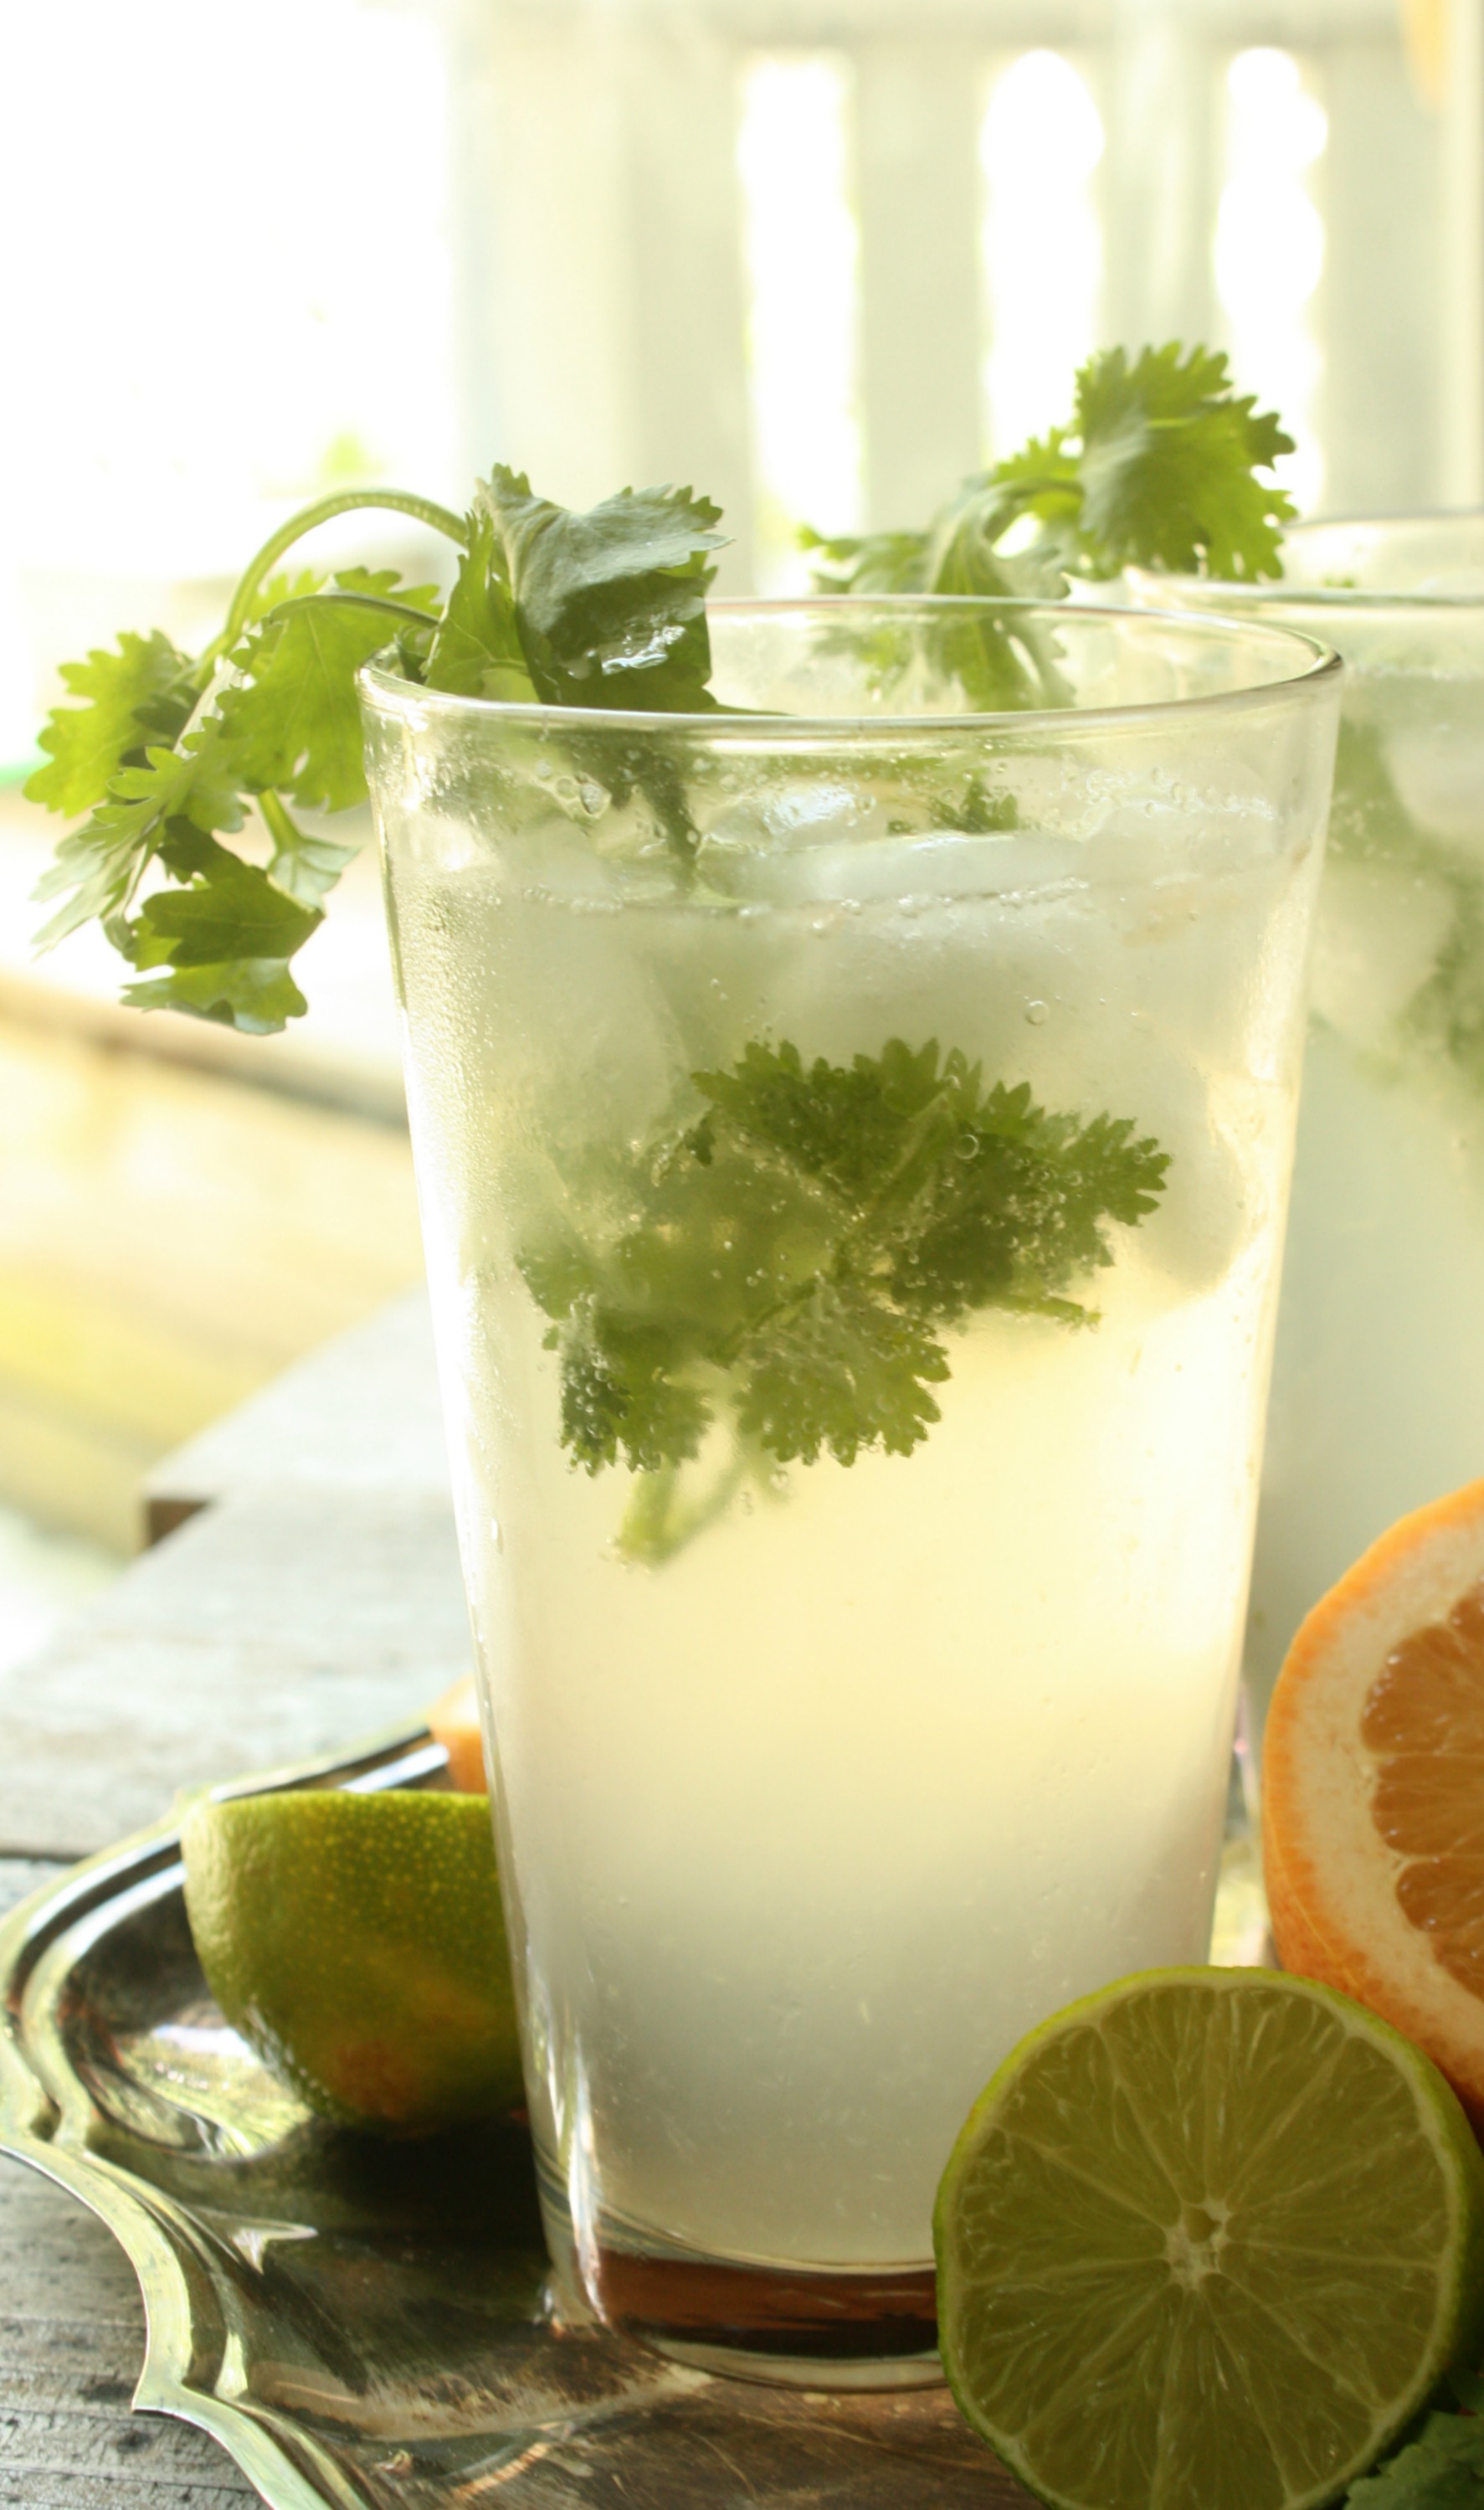 Upgrade that Gin and Tonic with Cilantro Grapefruit and a twist of Lime. Cilantro Grapefruit Gin and Tonic is a refreshing Summer Cocktail. 